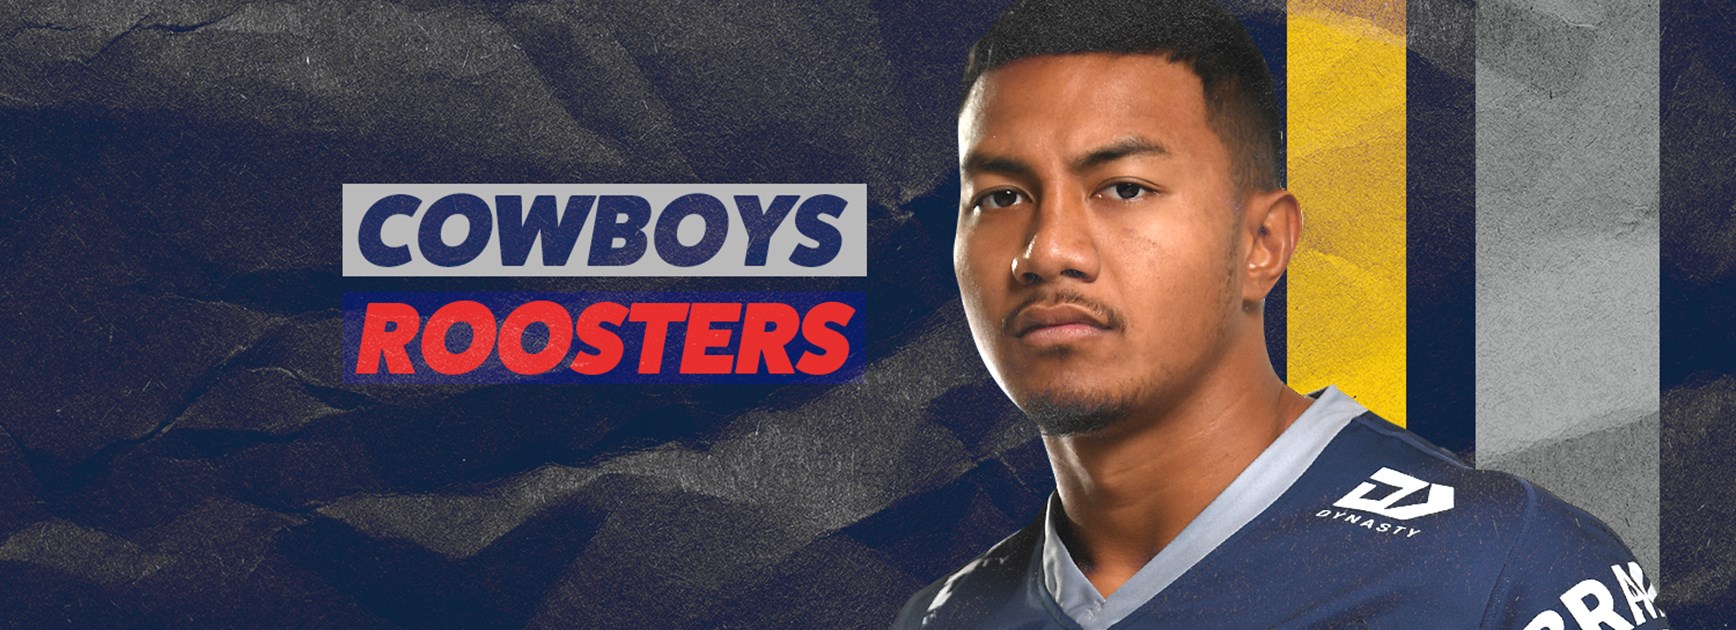 Cowboys team list: Round 18 v Roosters(2)